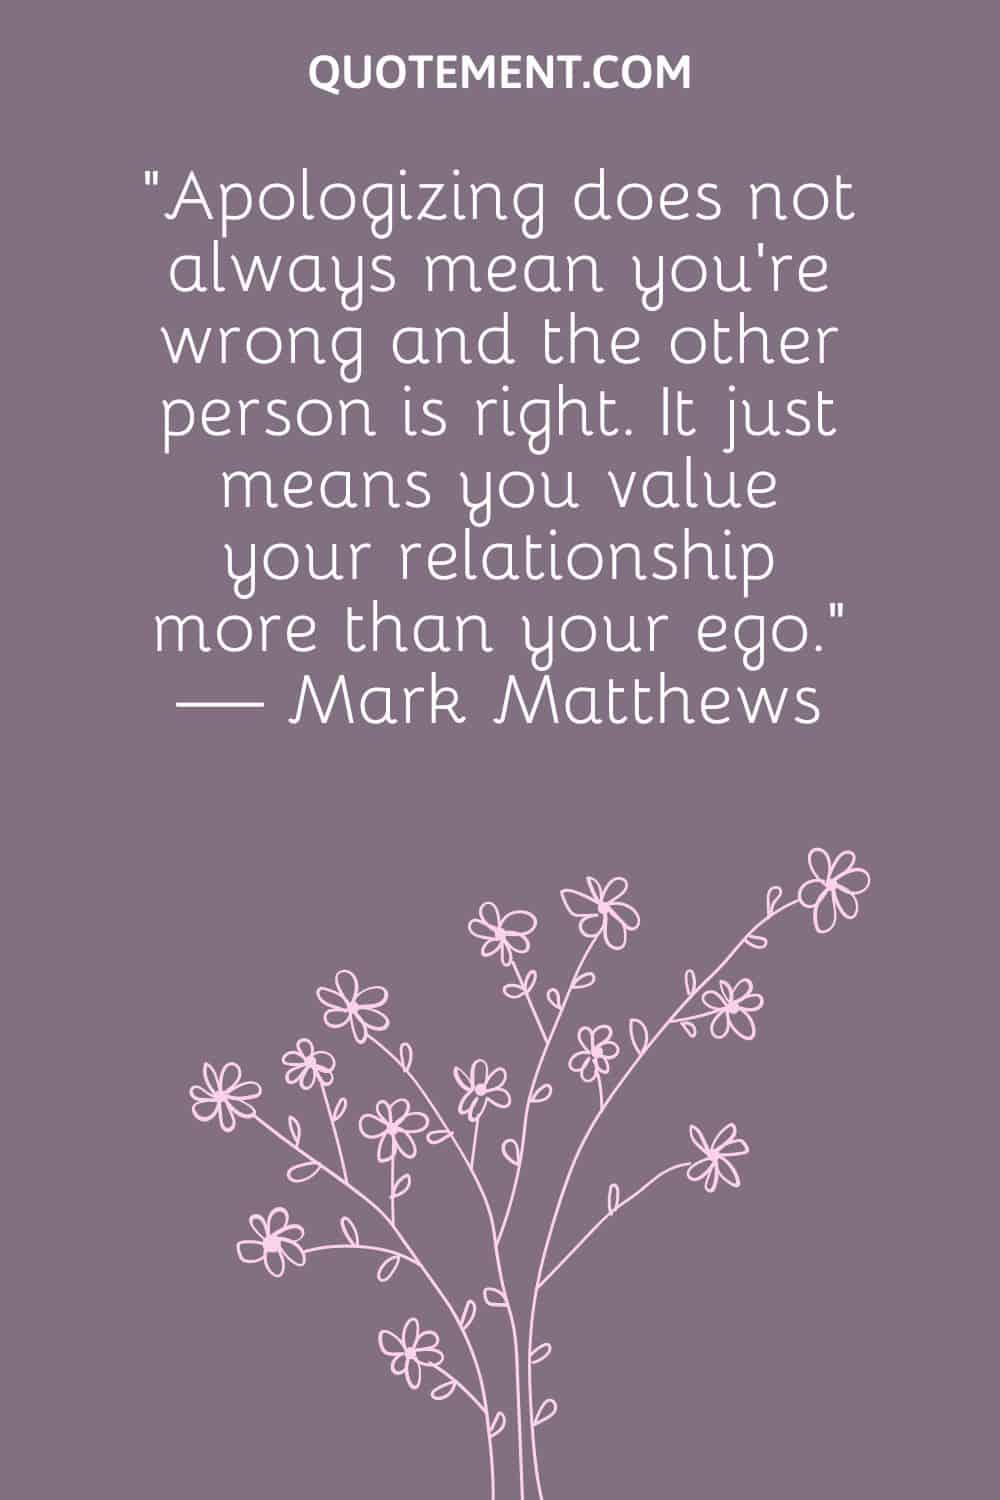 “Apologizing does not always mean you're wrong and the other person is right. It just means you value your relationship more than your ego.” — Mark Matthews